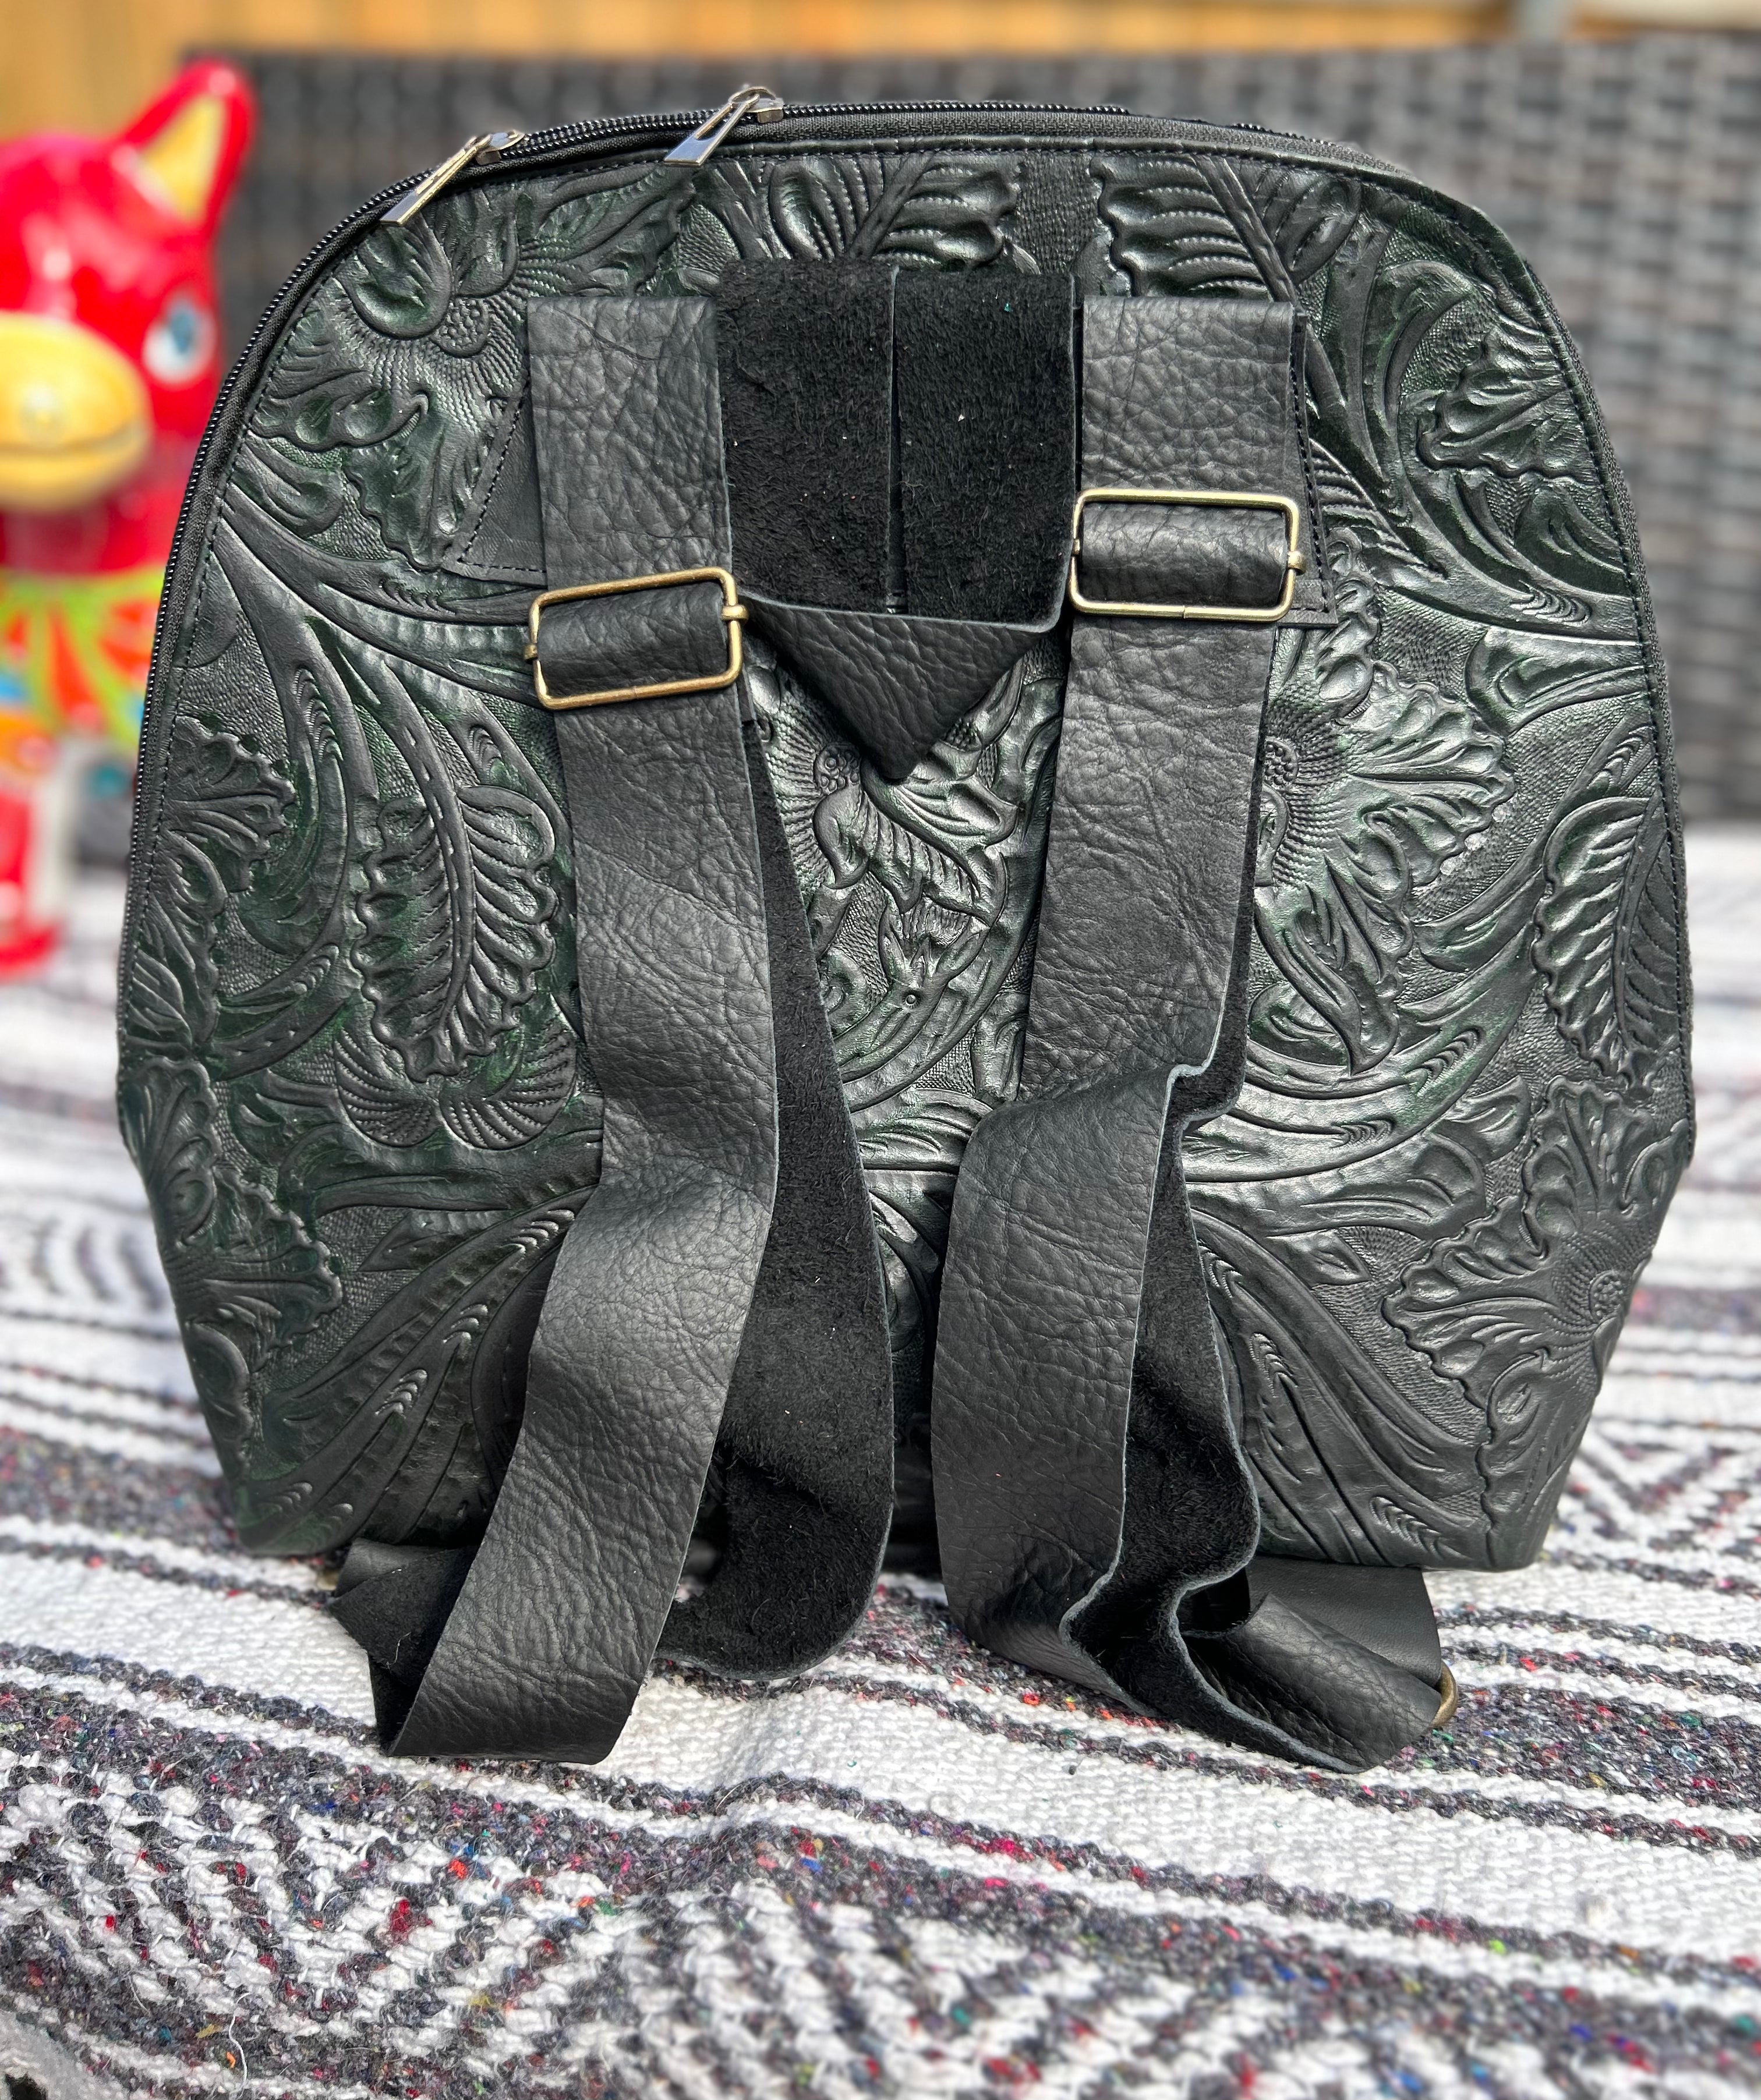 DESTINY MEXICAN LEATHER BACKPACK